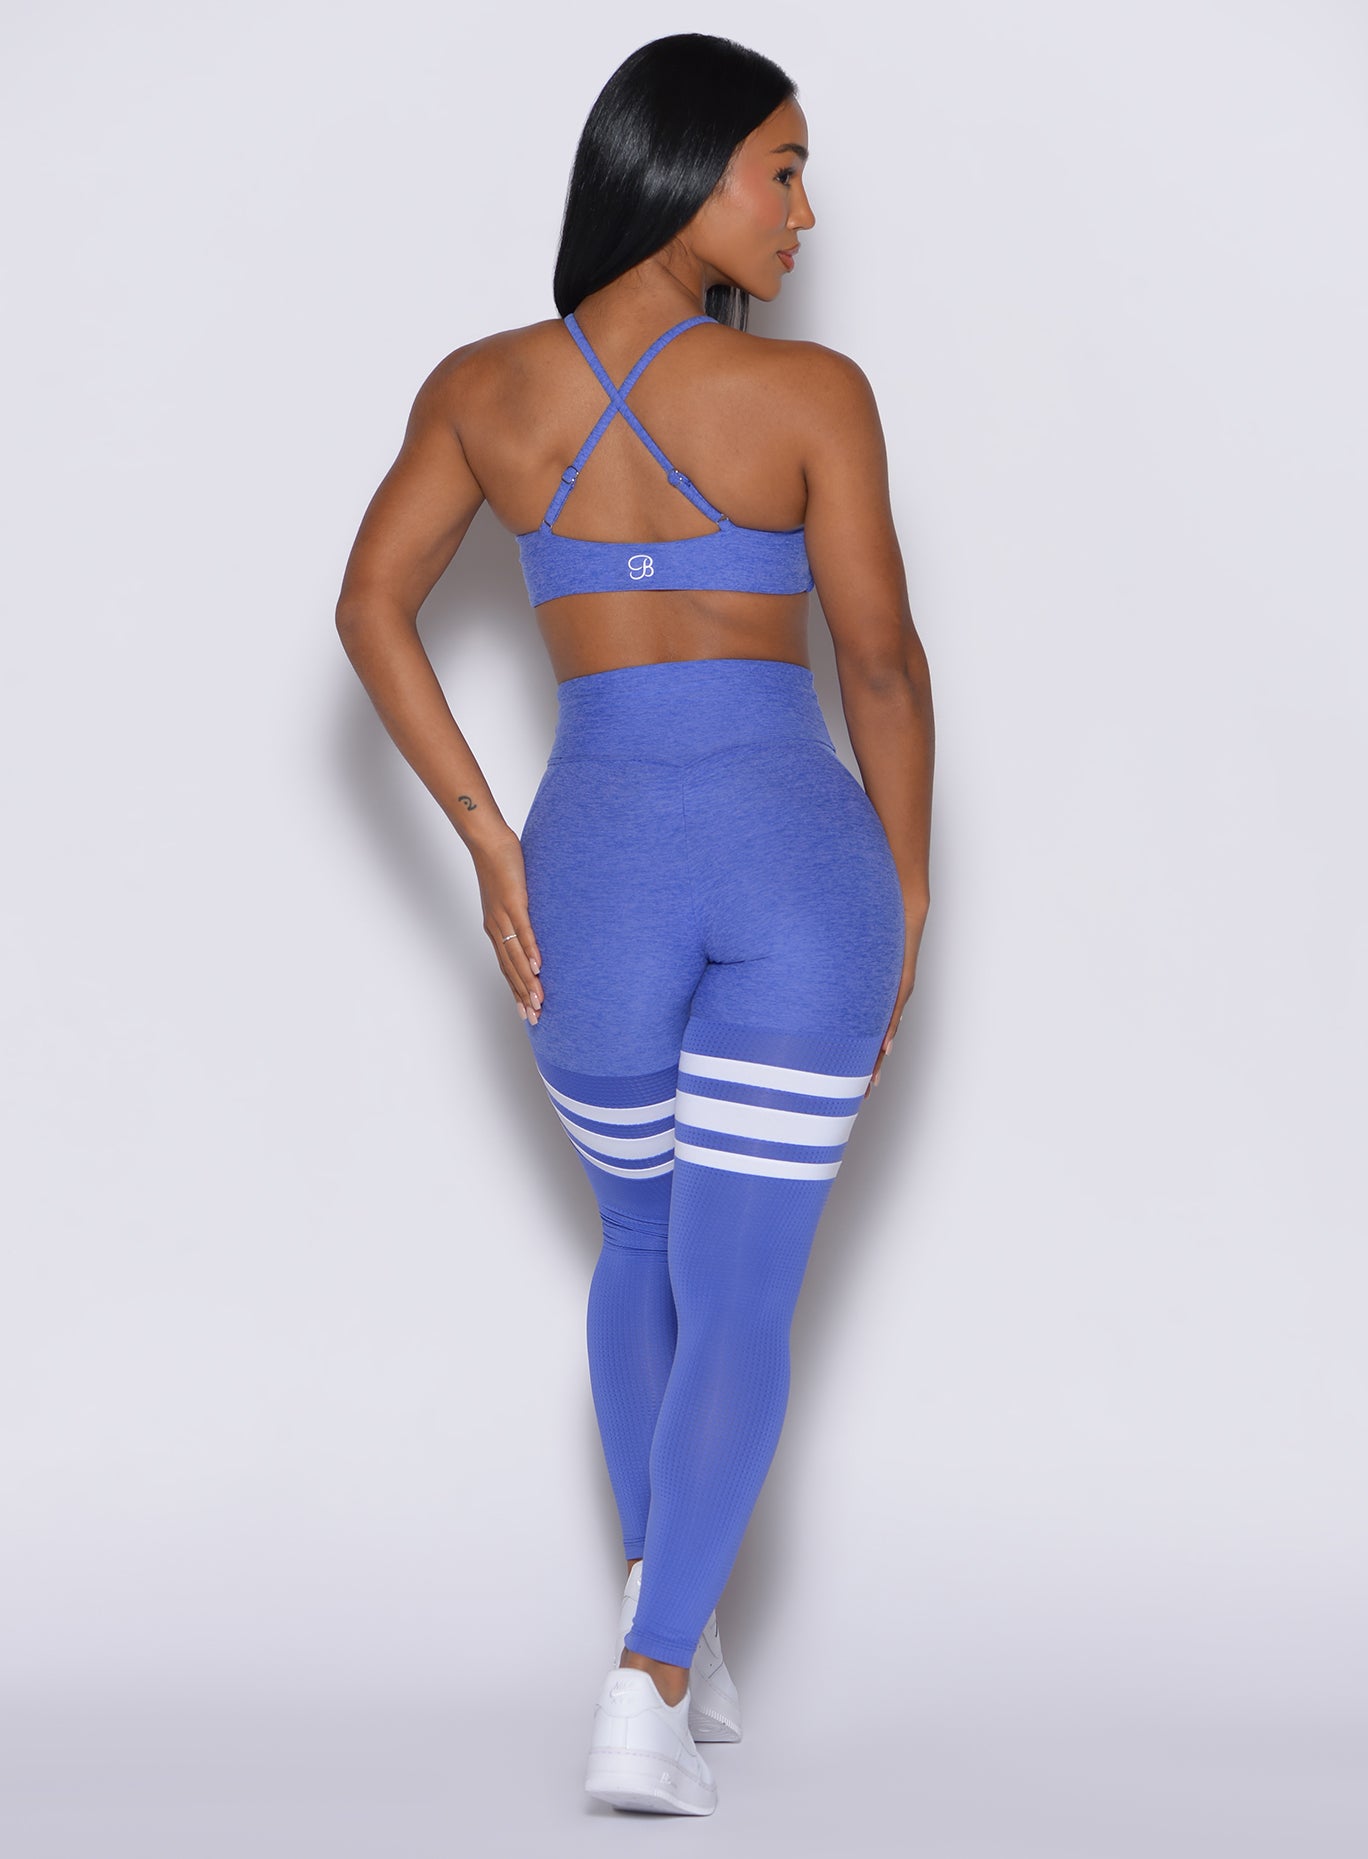 Back profile view of a model wearing our scrunch thigh-highs in violet blue with three white stripes on the thighs, complemented by a matching sports bra.